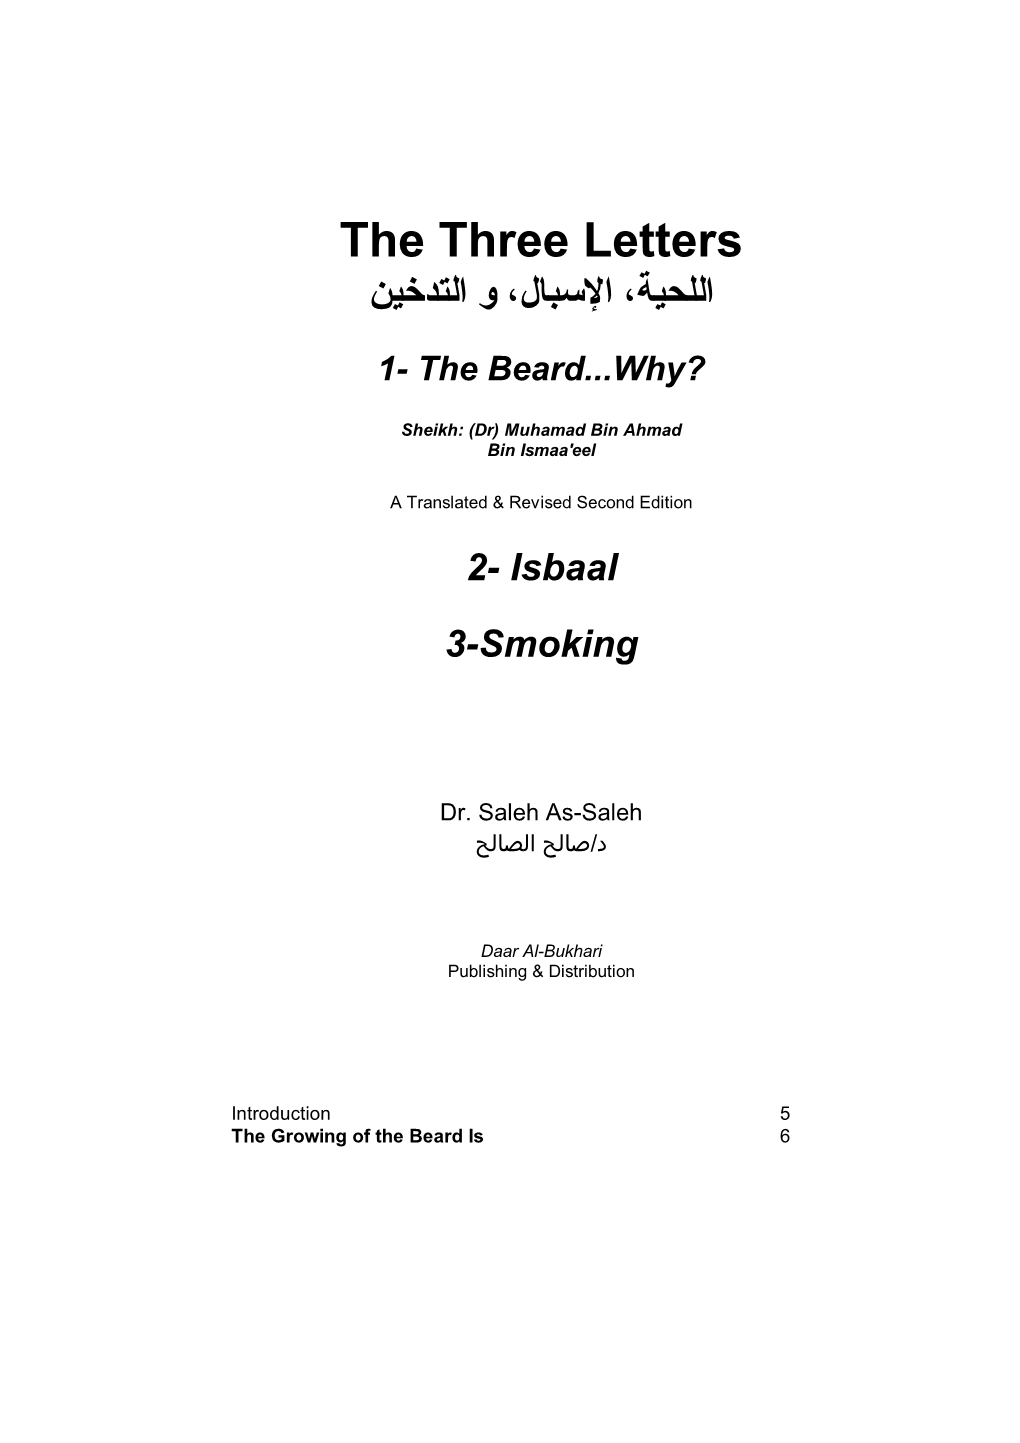 The Three Letters – the Beard, Isbaal , Smoking